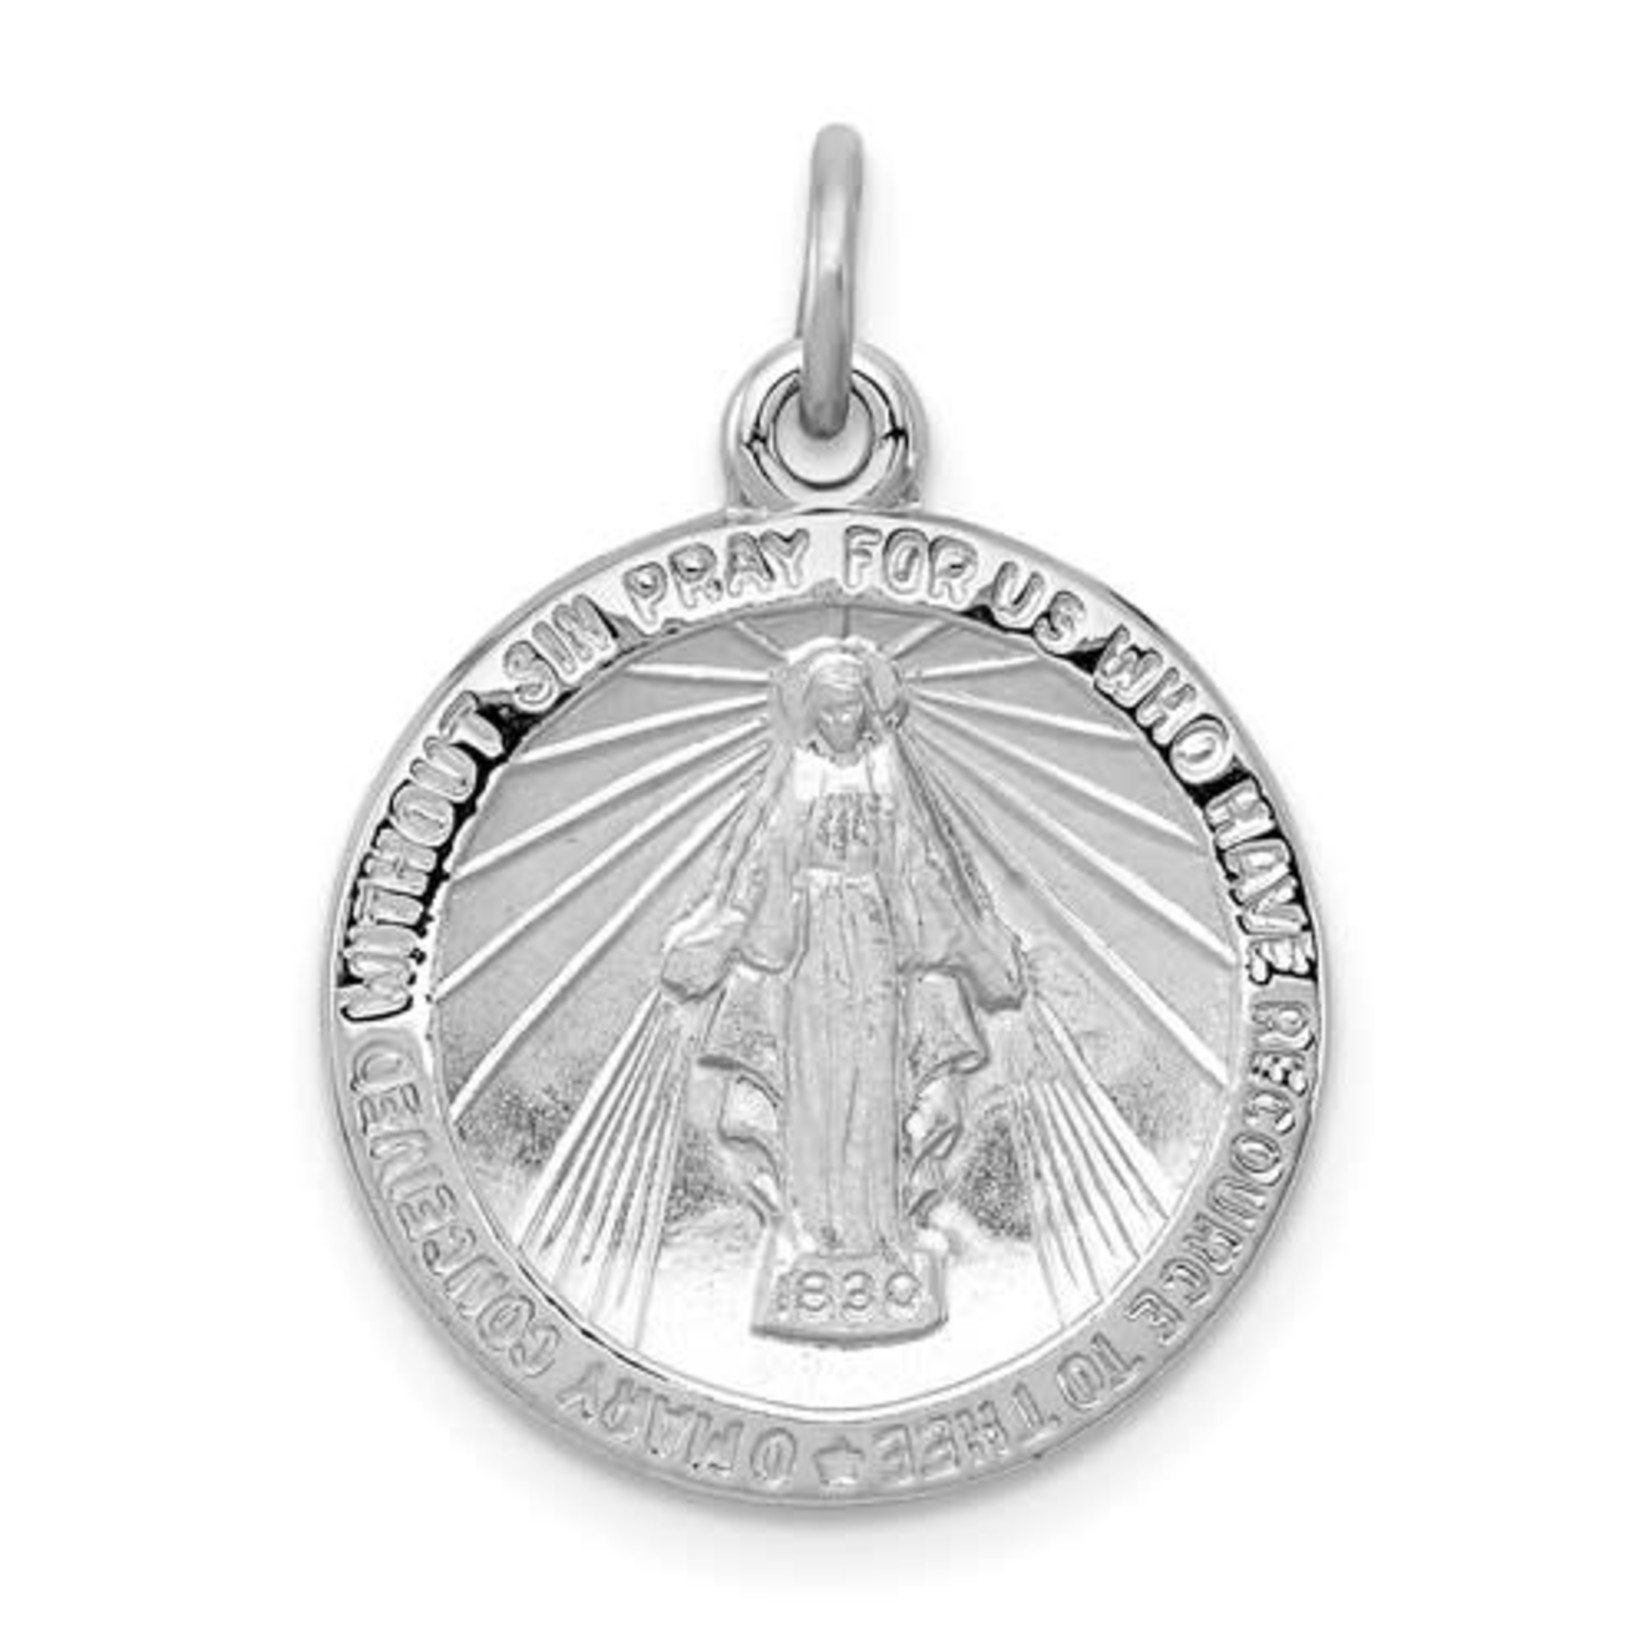 QUALITY GOLD OF CINCINNATI INC Sterling Silver Round Miraculous Medal